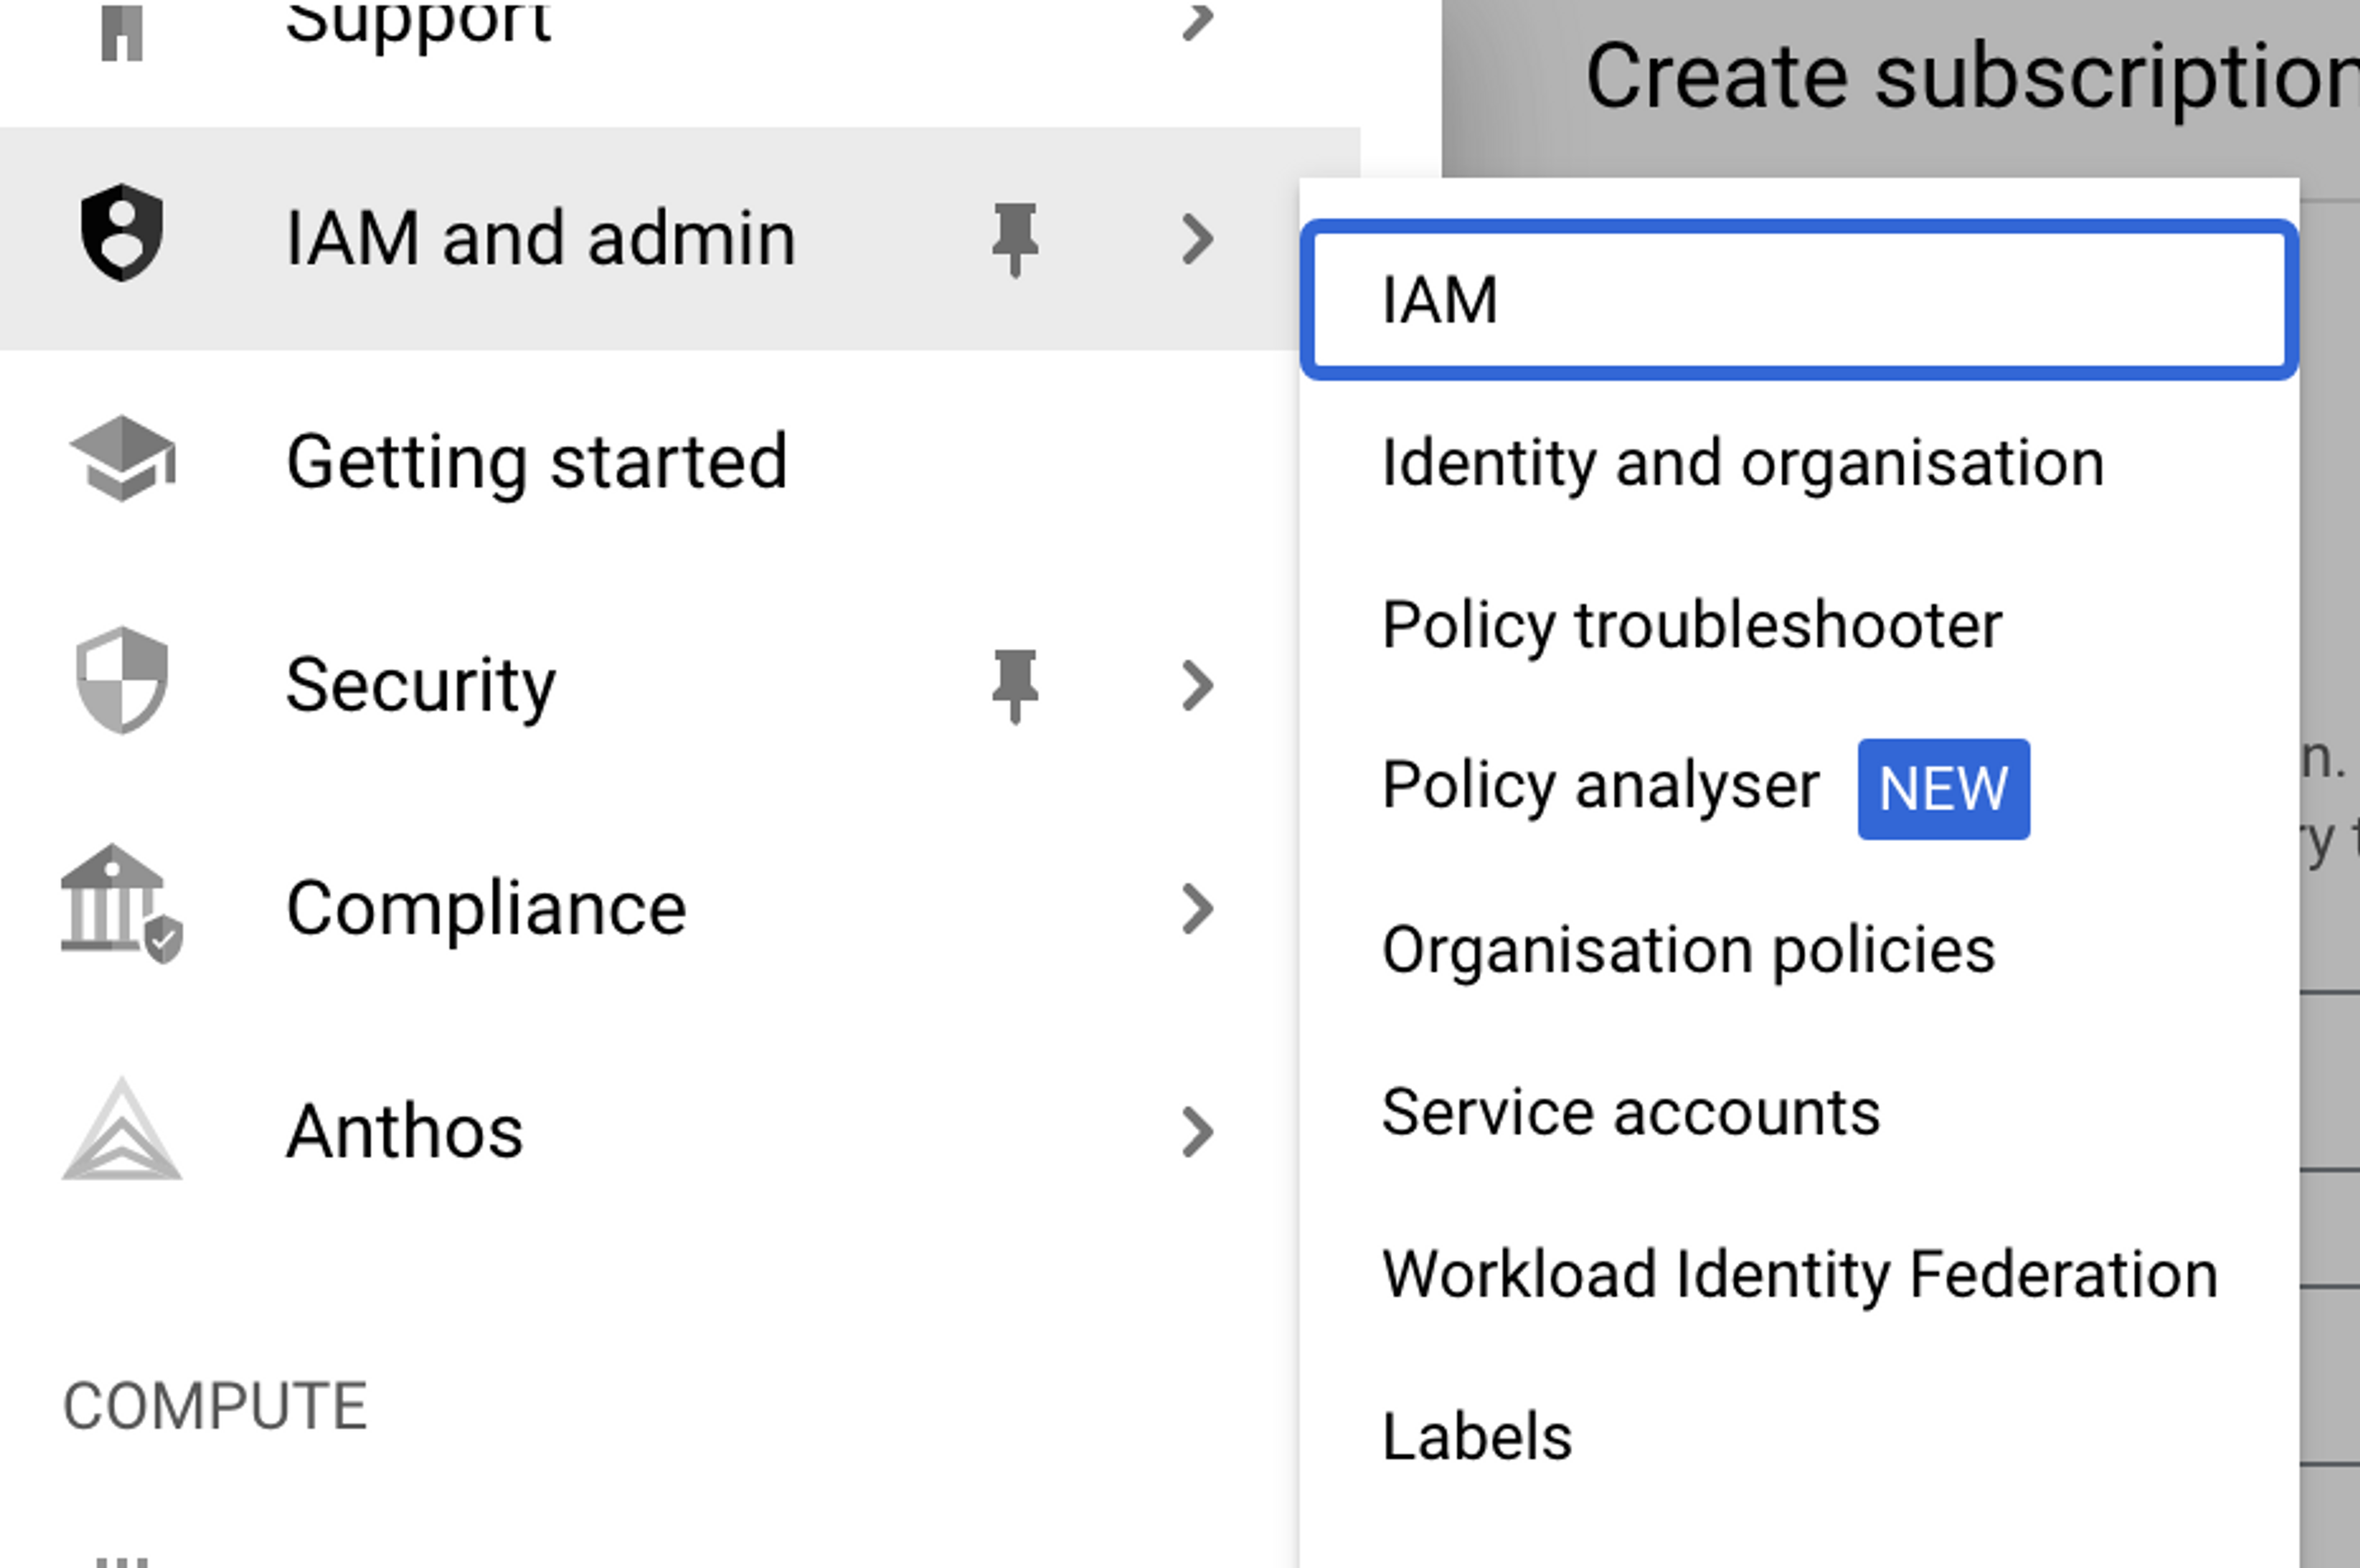 A screenshot showing the location of the "IAM" submenu item within the "IAM and admin" parent menu